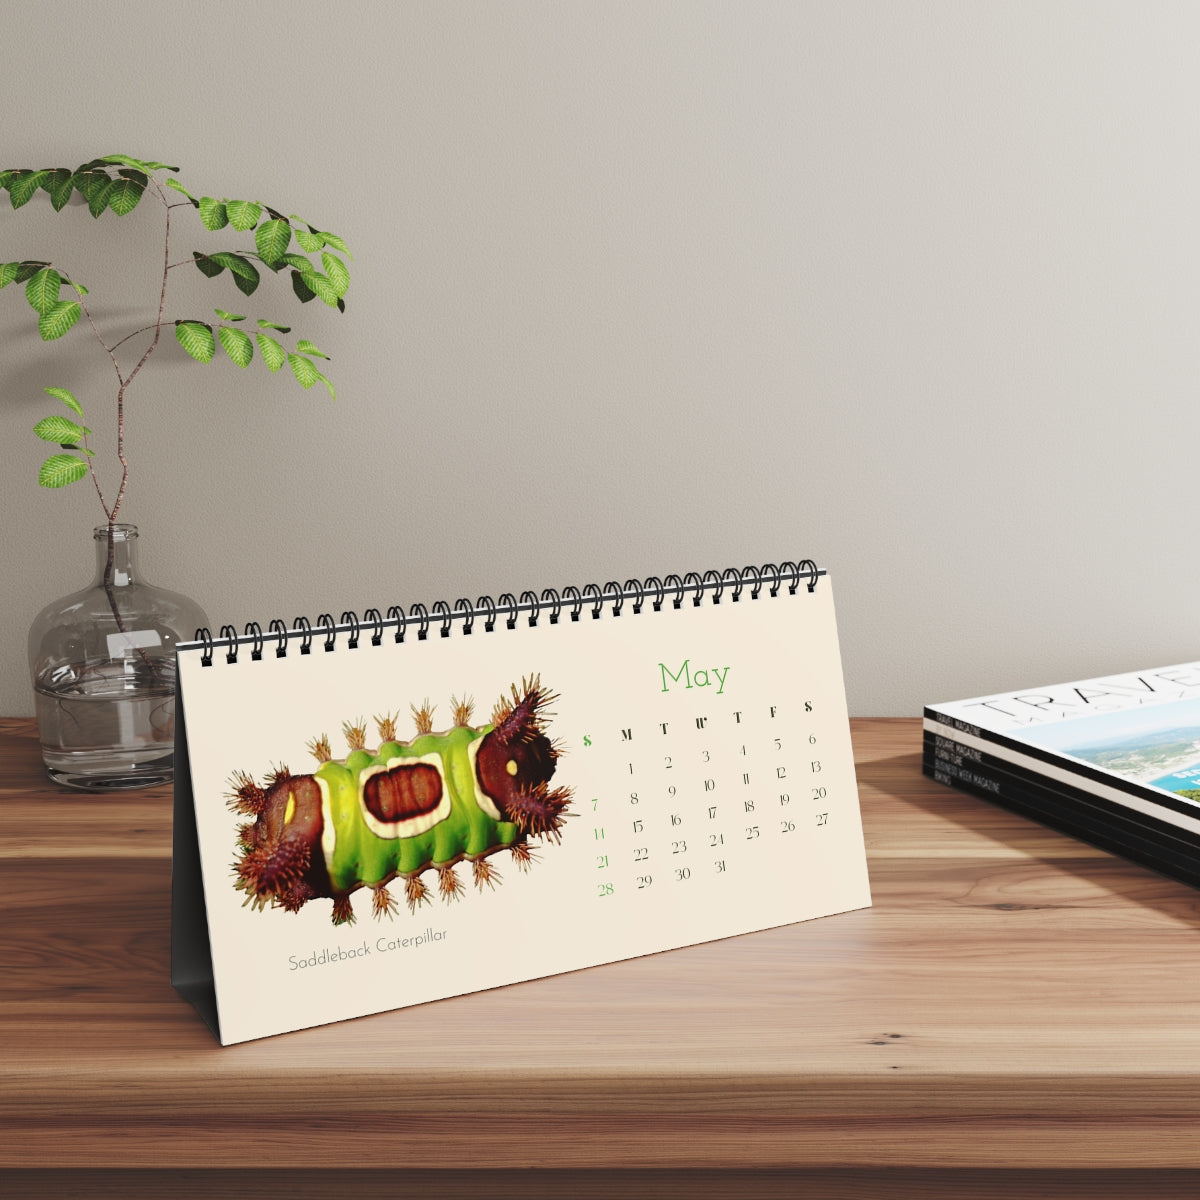 Incredible Insects of 20203 Desk Calendar